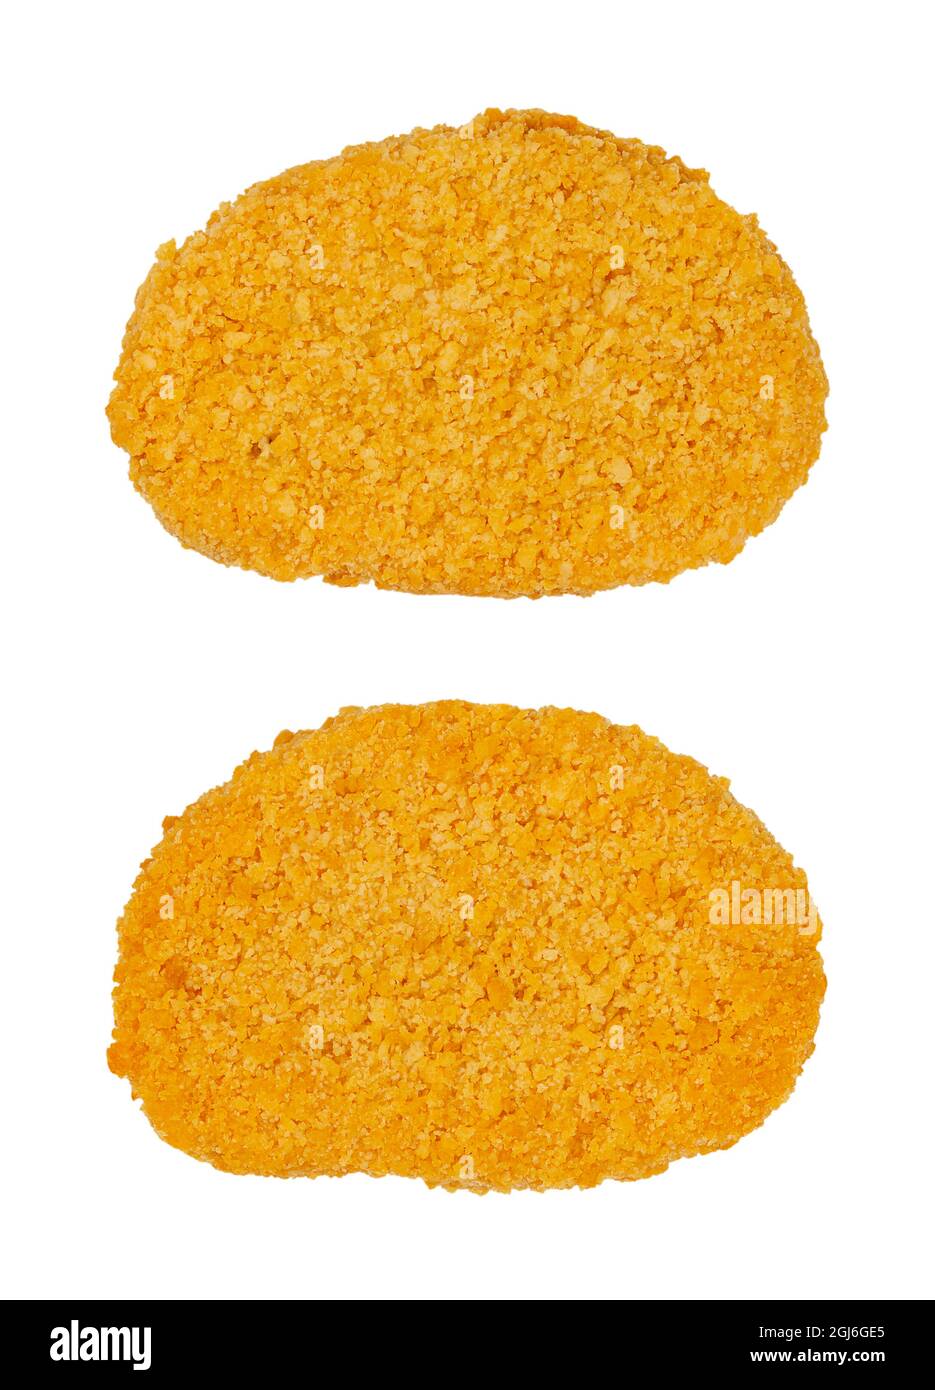 Two vegan breaded cutlets, from above, isolated on white background. Two slices of pre-fried schnitzel, based on soy protein, a meat substitute. Stock Photo